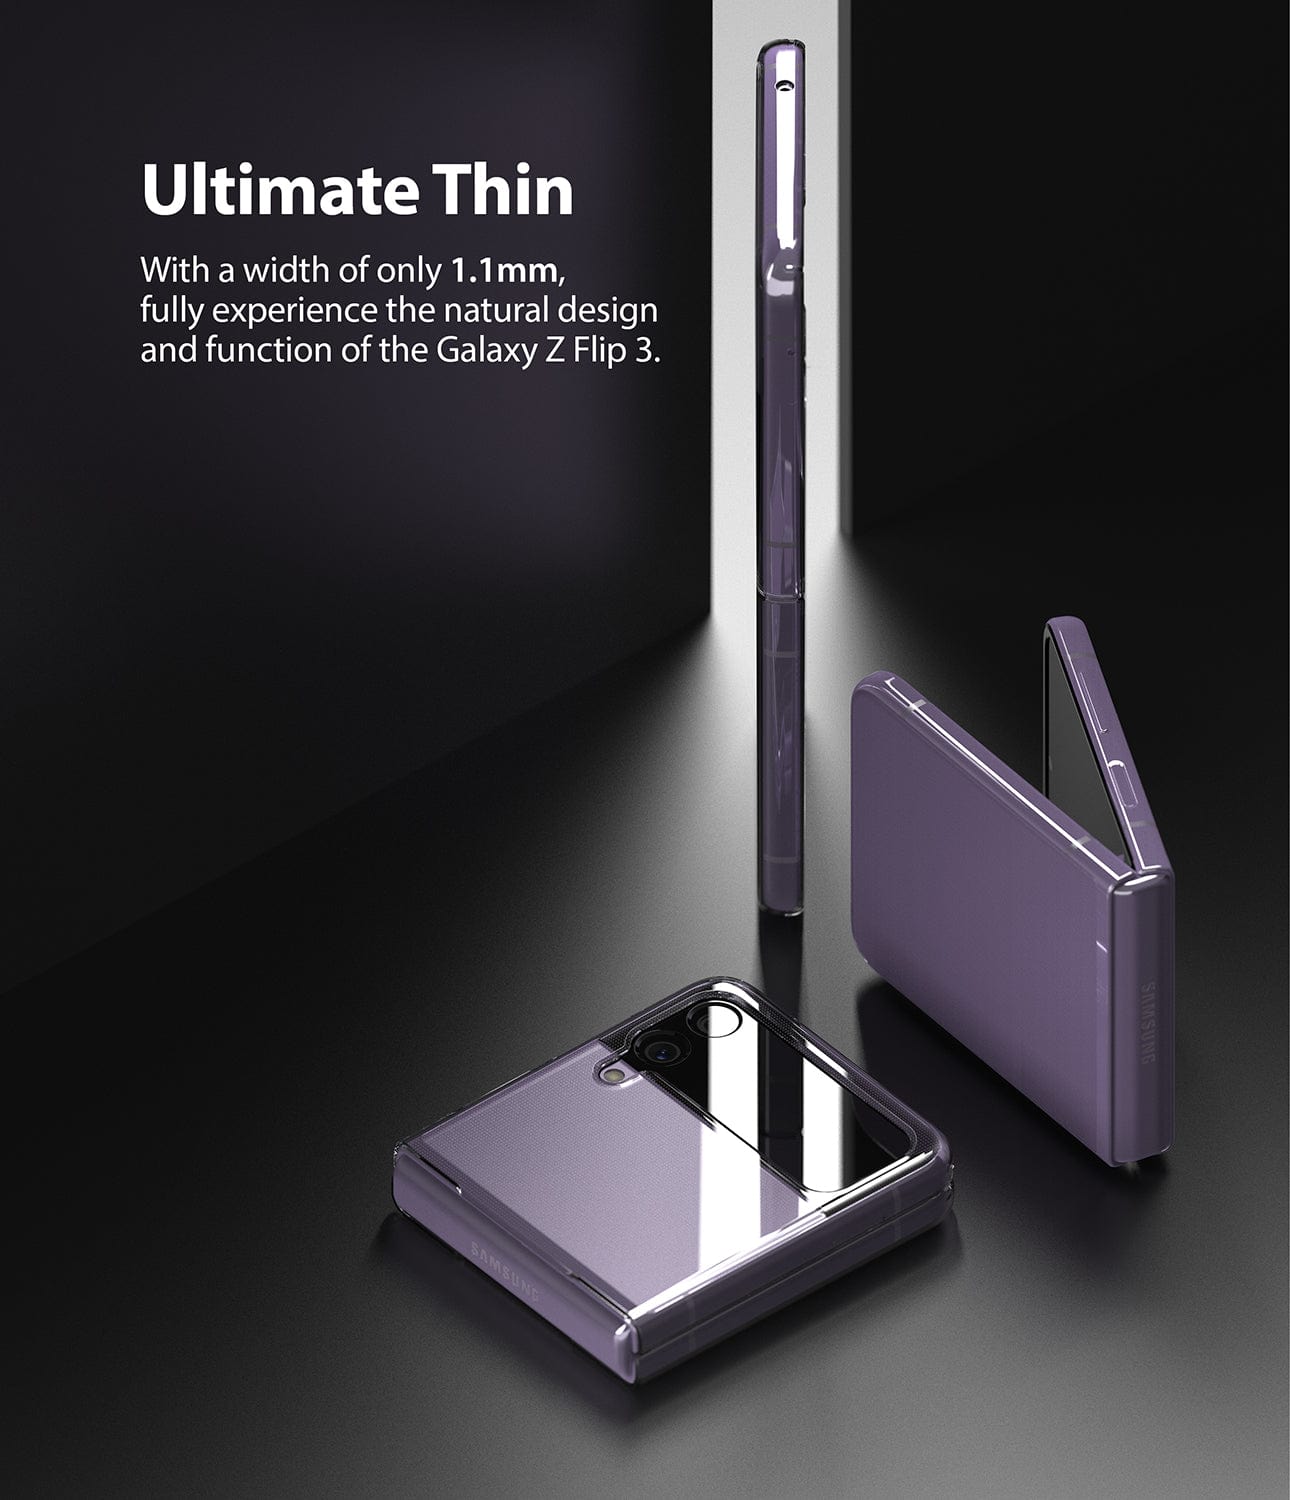 Ultimate thin with a natural design and functional for Galaxy Z Flip 3